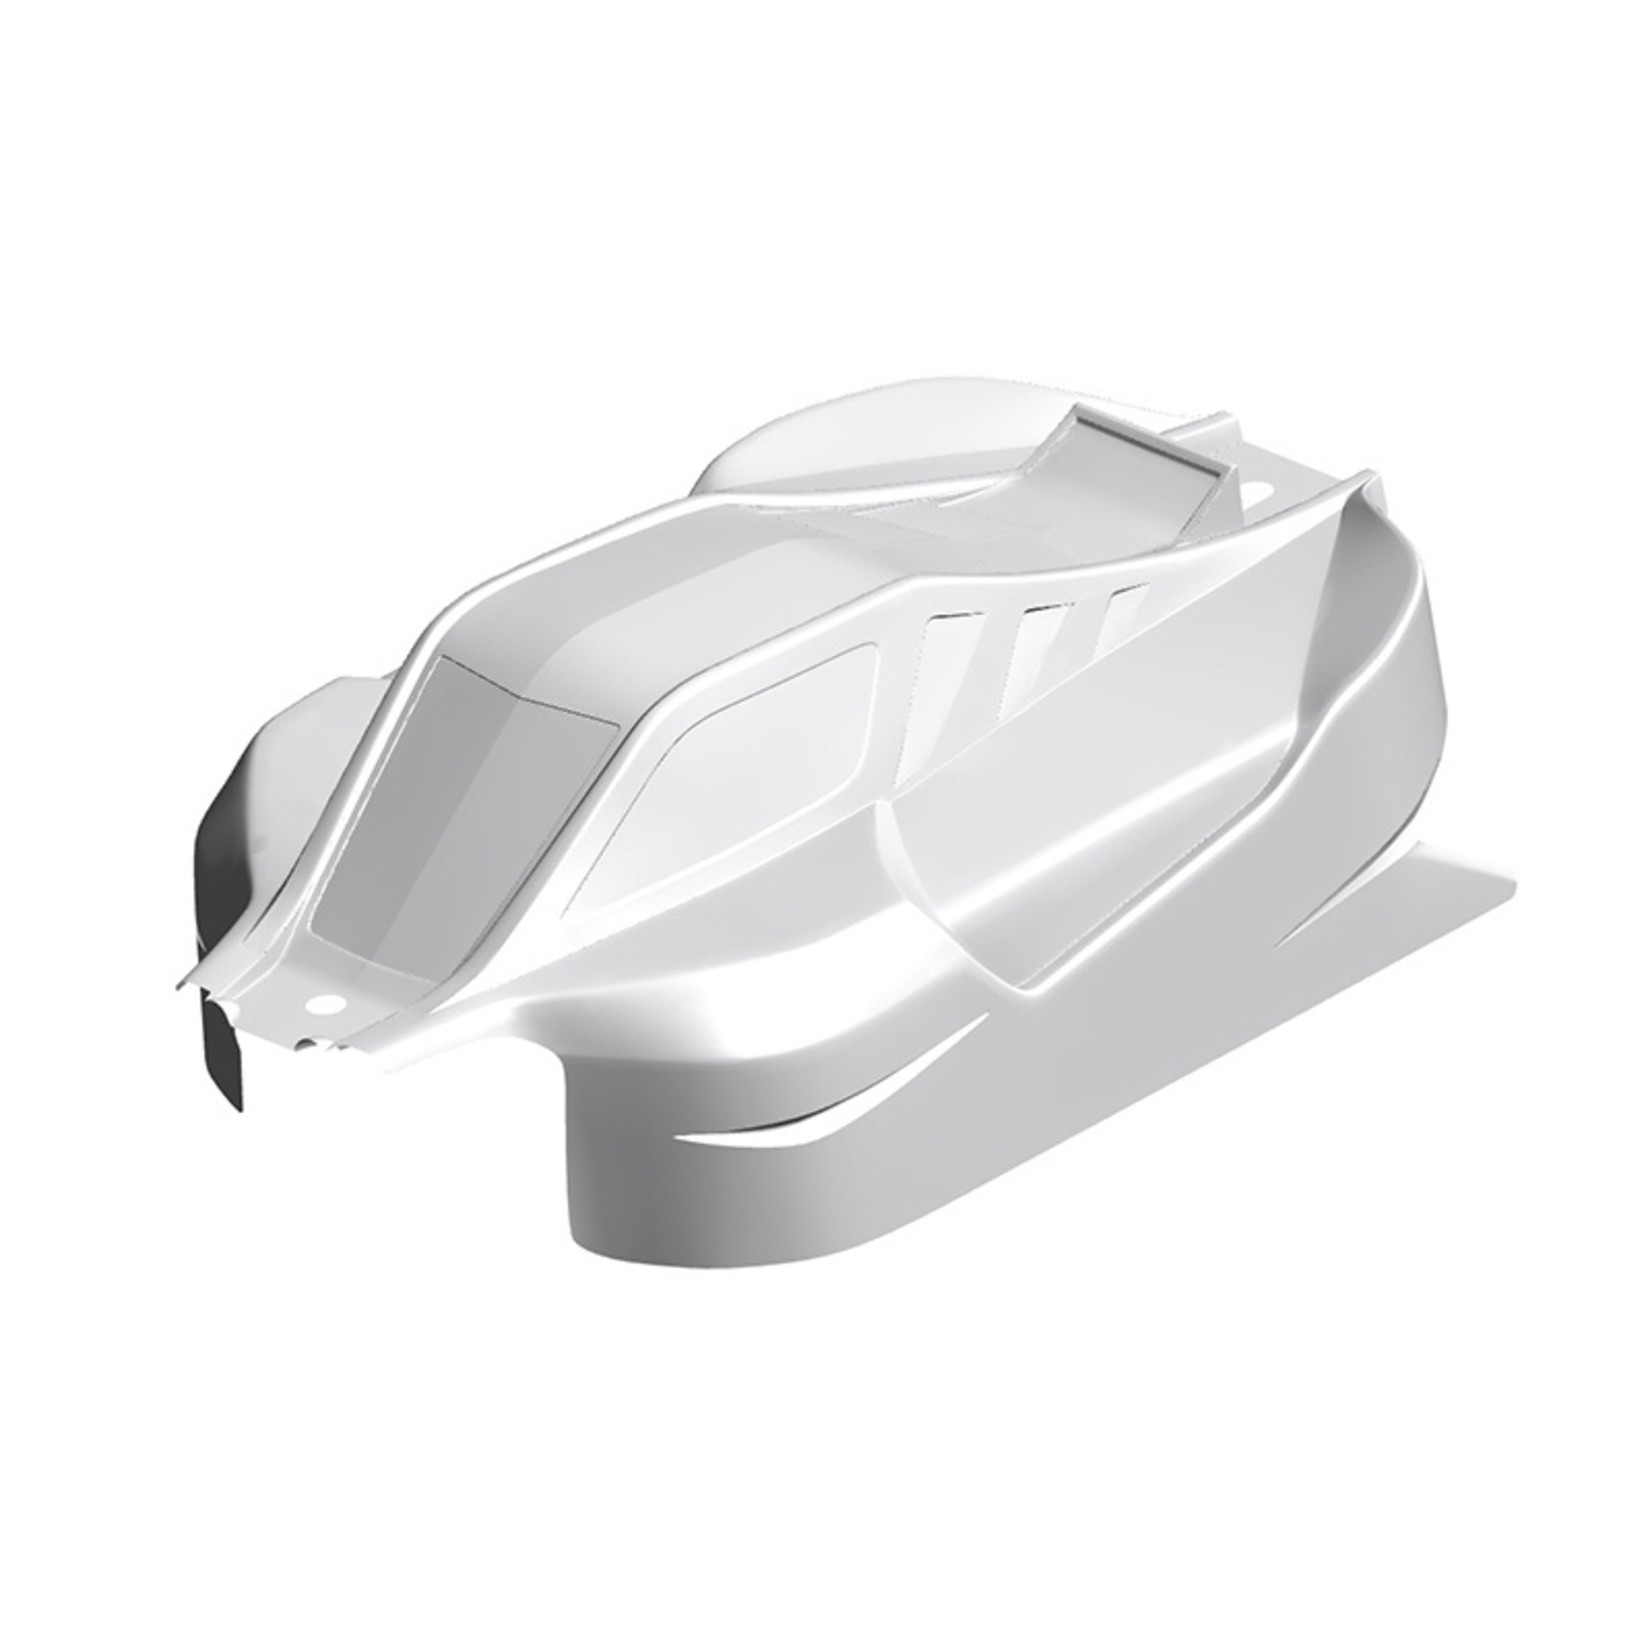 Corally (Team Corally) Polycarbonate Body - Radix XP - Clear - Cut - 1 pc